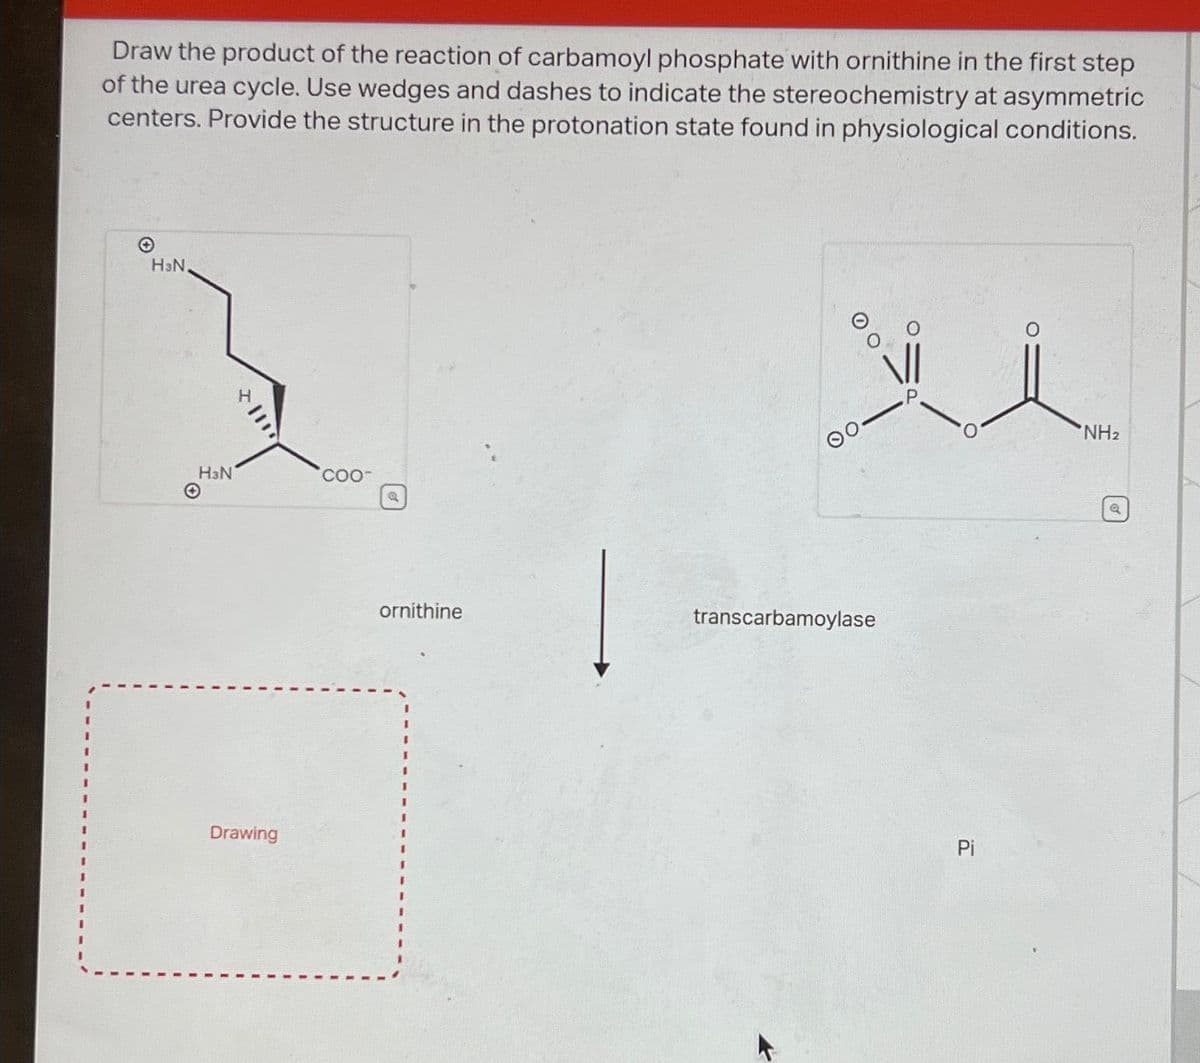 Draw the product of the reaction of carbamoyl phosphate with ornithine in the first step
of the urea cycle. Use wedges and dashes to indicate the stereochemistry at asymmetric
centers. Provide the structure in the protonation state found in physiological conditions.
H³N,
H3N
Drawing
coo-
Q
ornithine
O
transcarbamoylase
Pi
NH₂
Q